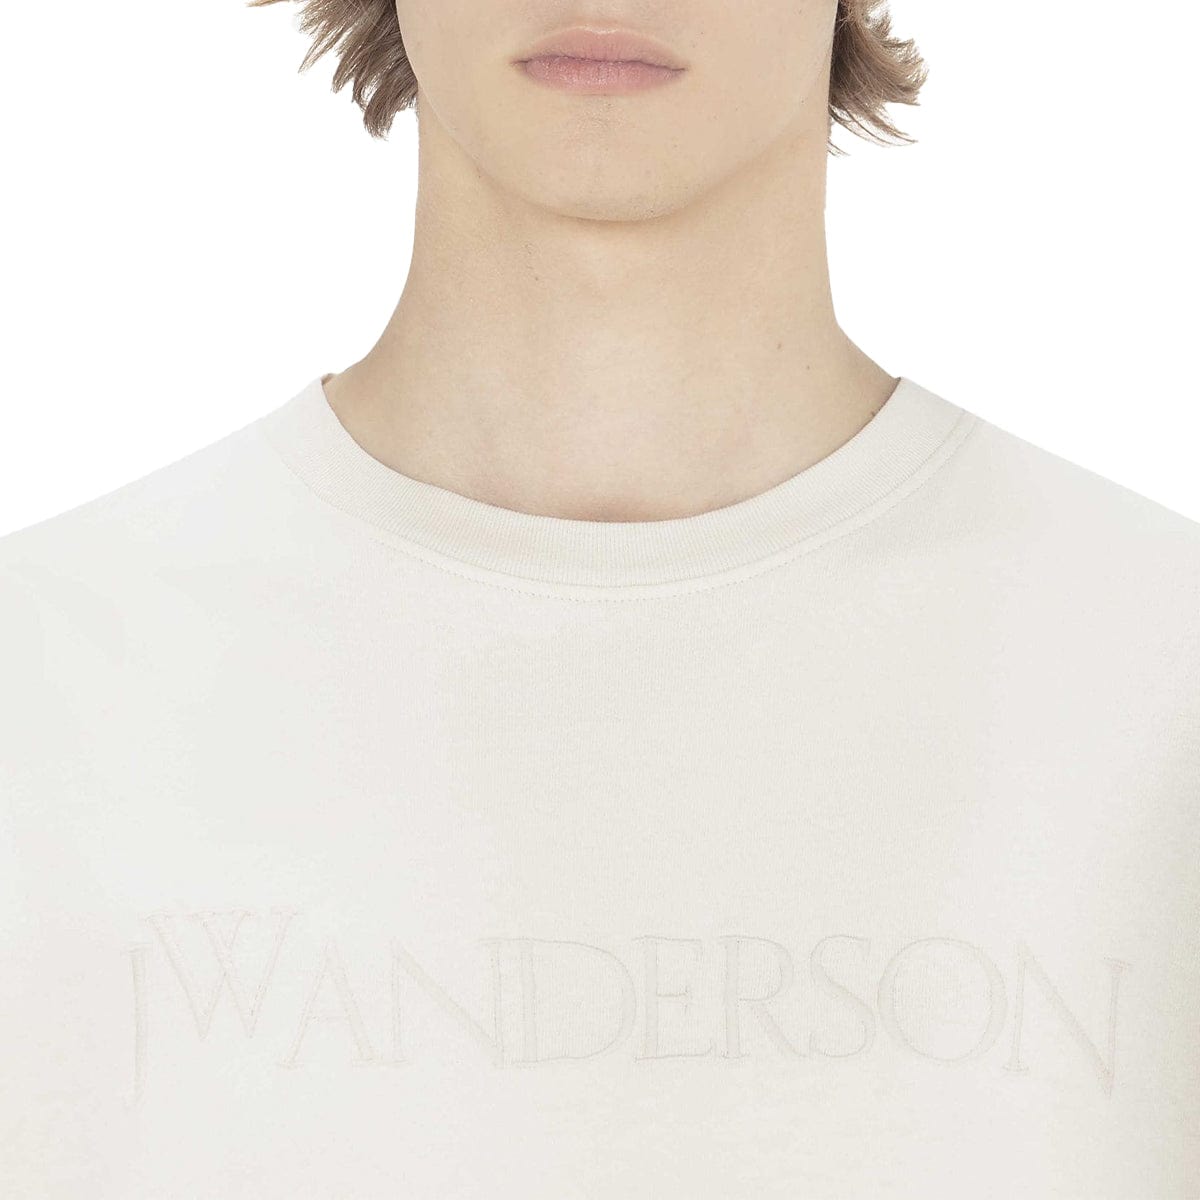 JW Anderson T-Shirts LOGO EMBROIDERY T-SHIRT